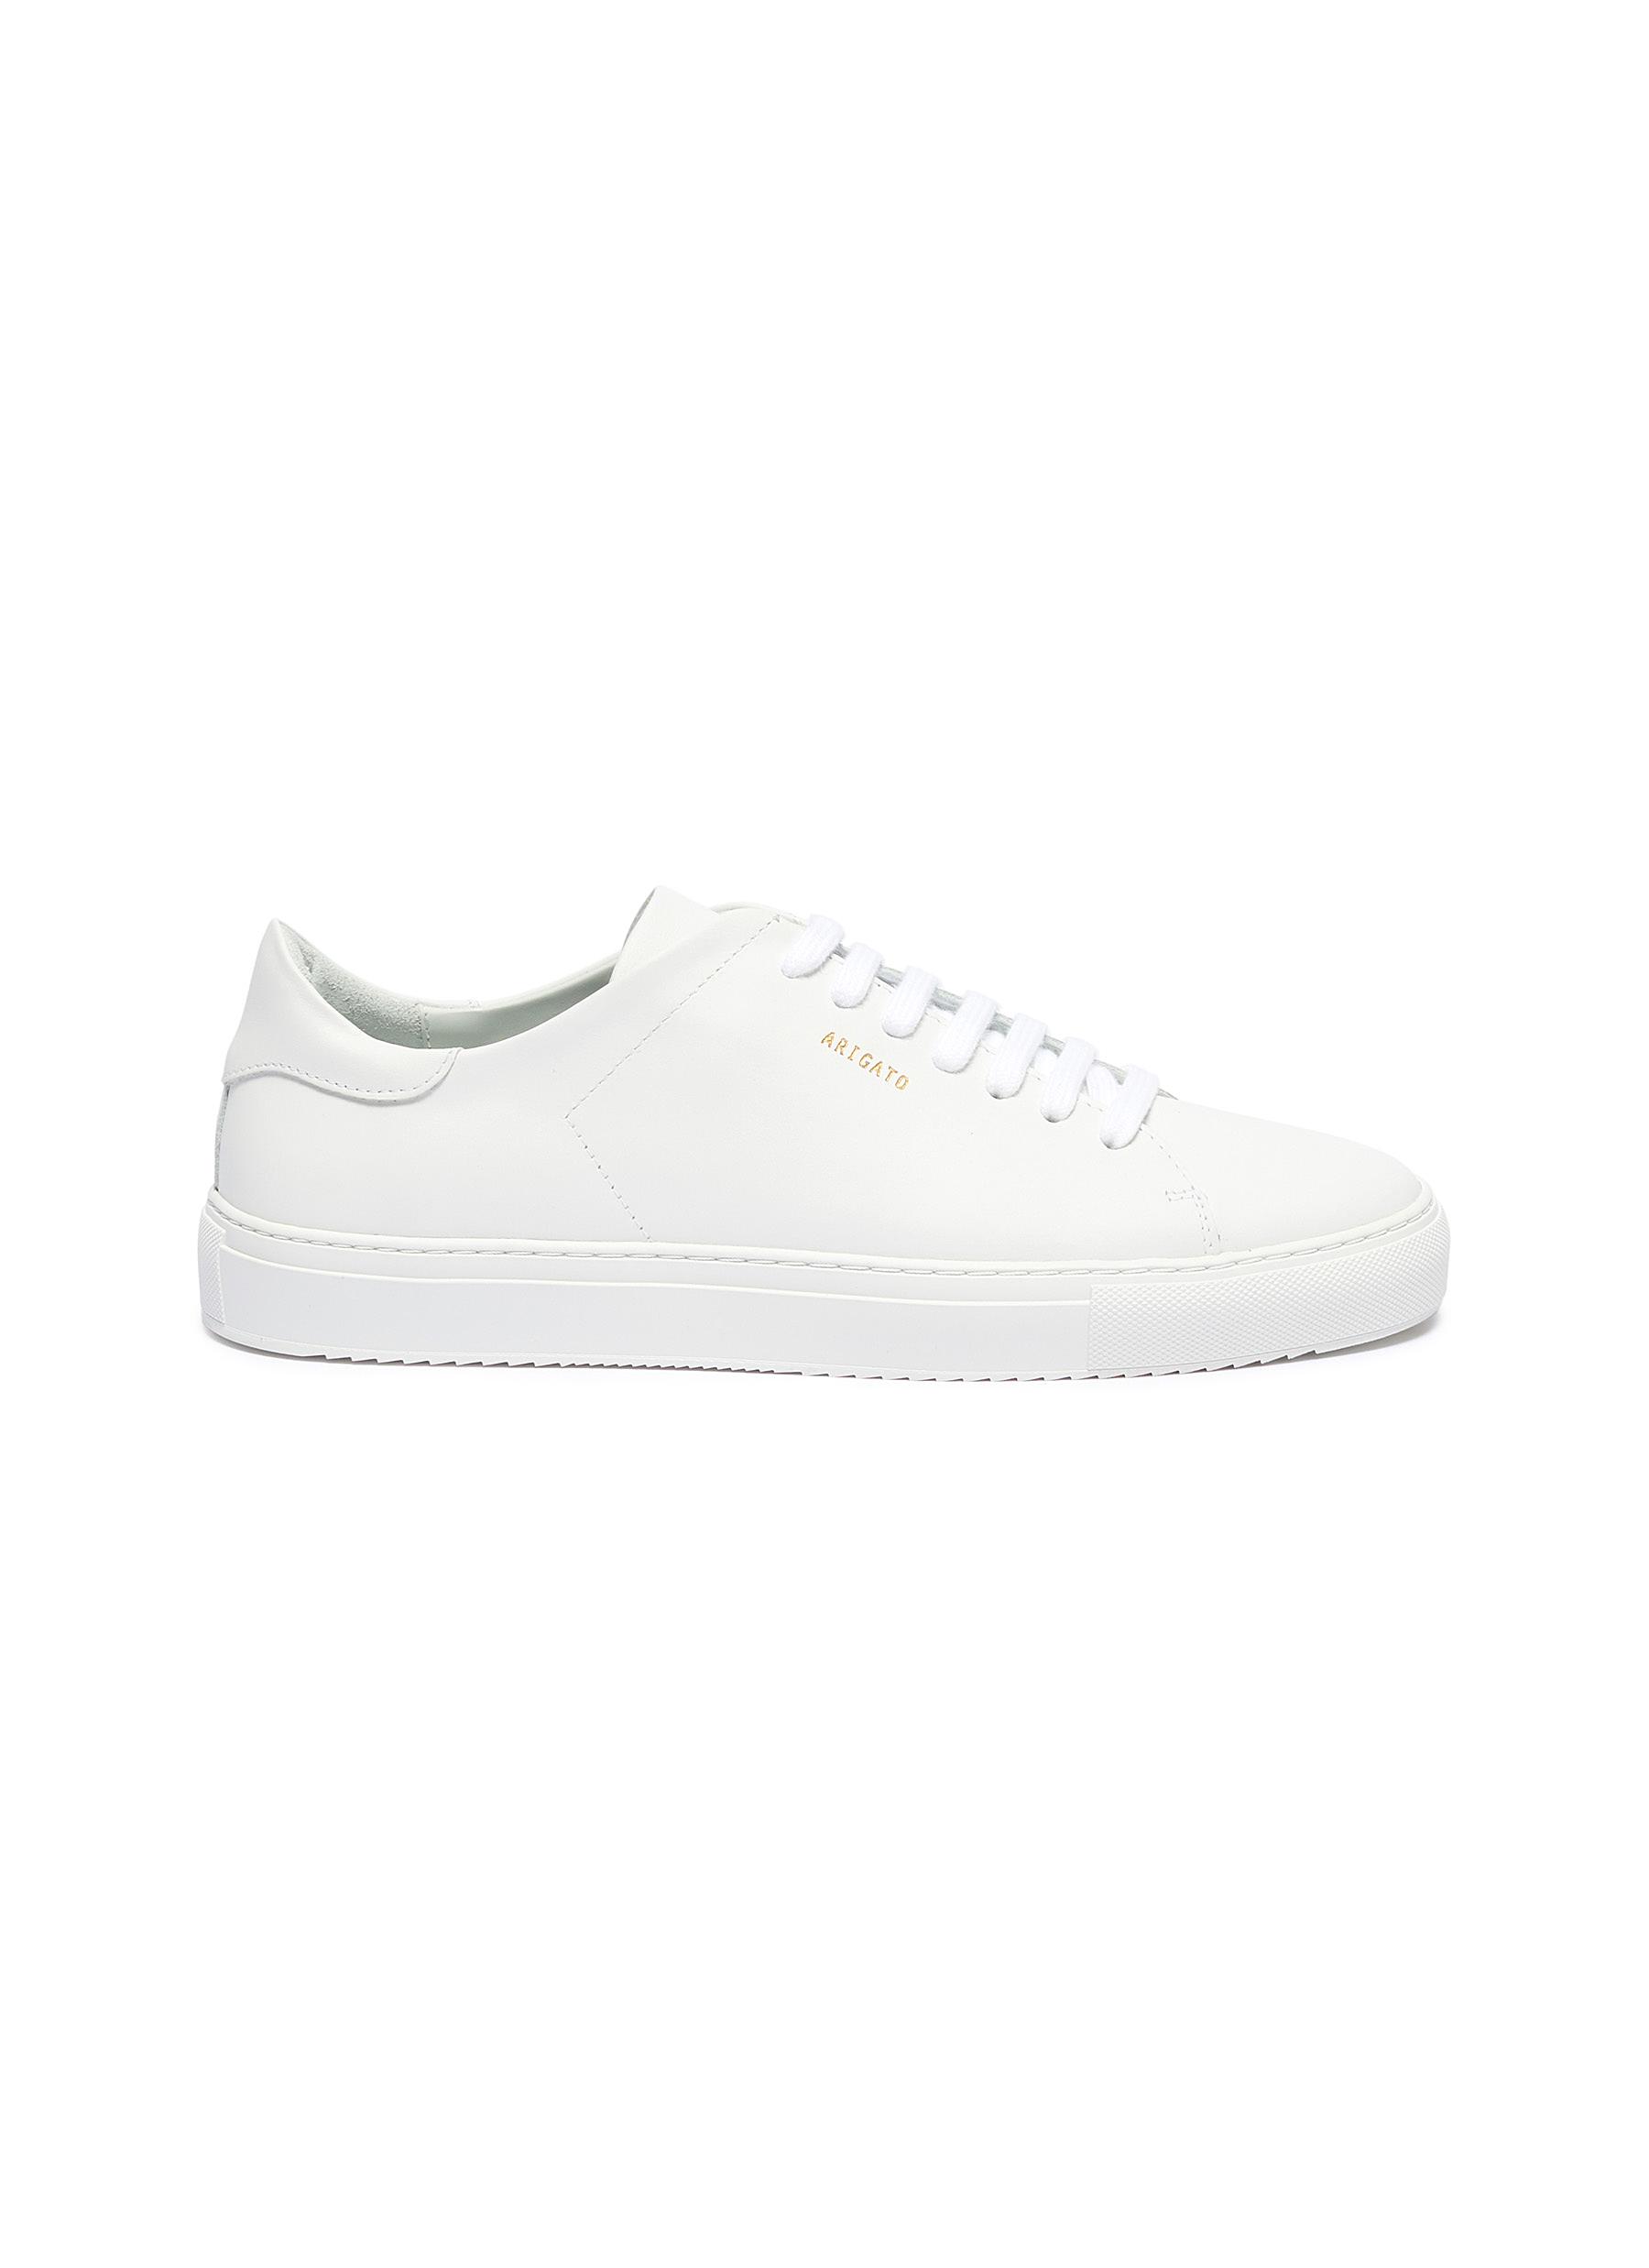 'Clean 90' leather sneakers